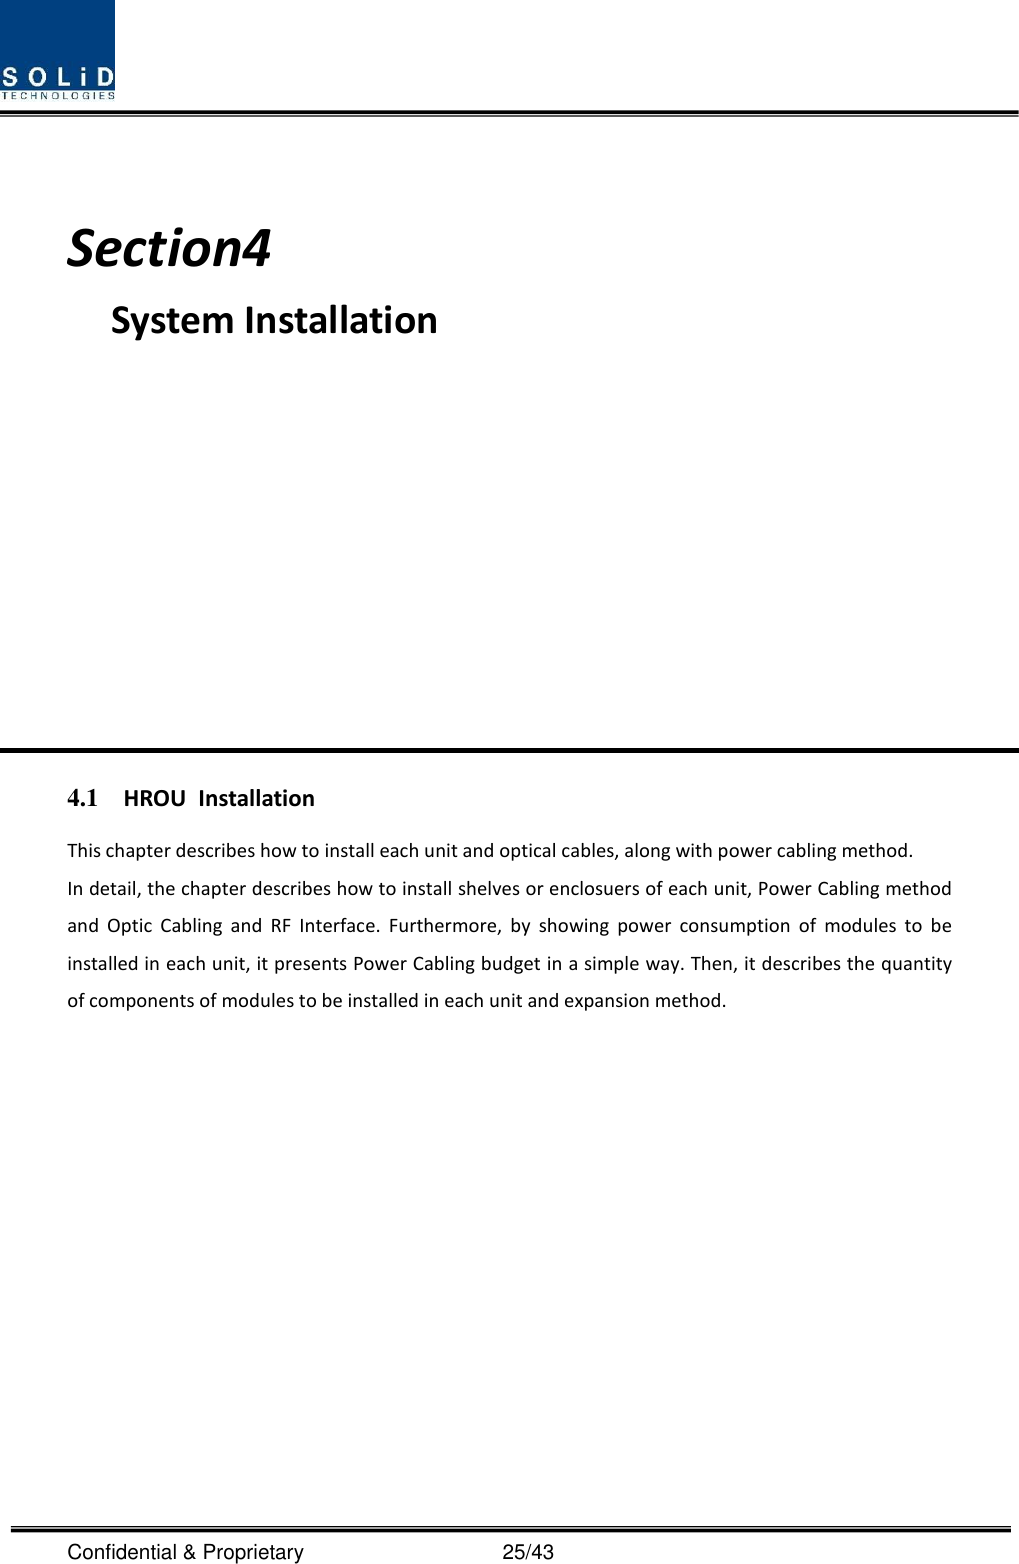  Confidential &amp; Proprietary                                      25/43   Section4                                           System Installation            4.1 HROU  Installation This chapter describes how to install each unit and optical cables, along with power cabling method. In detail, the chapter describes how to install shelves or enclosuers of each unit, Power Cabling method and  Optic  Cabling  and  RF  Interface.  Furthermore,  by  showing  power  consumption  of  modules  to  be installed in each unit, it presents Power Cabling budget in a simple way. Then, it describes the quantity of components of modules to be installed in each unit and expansion method.            